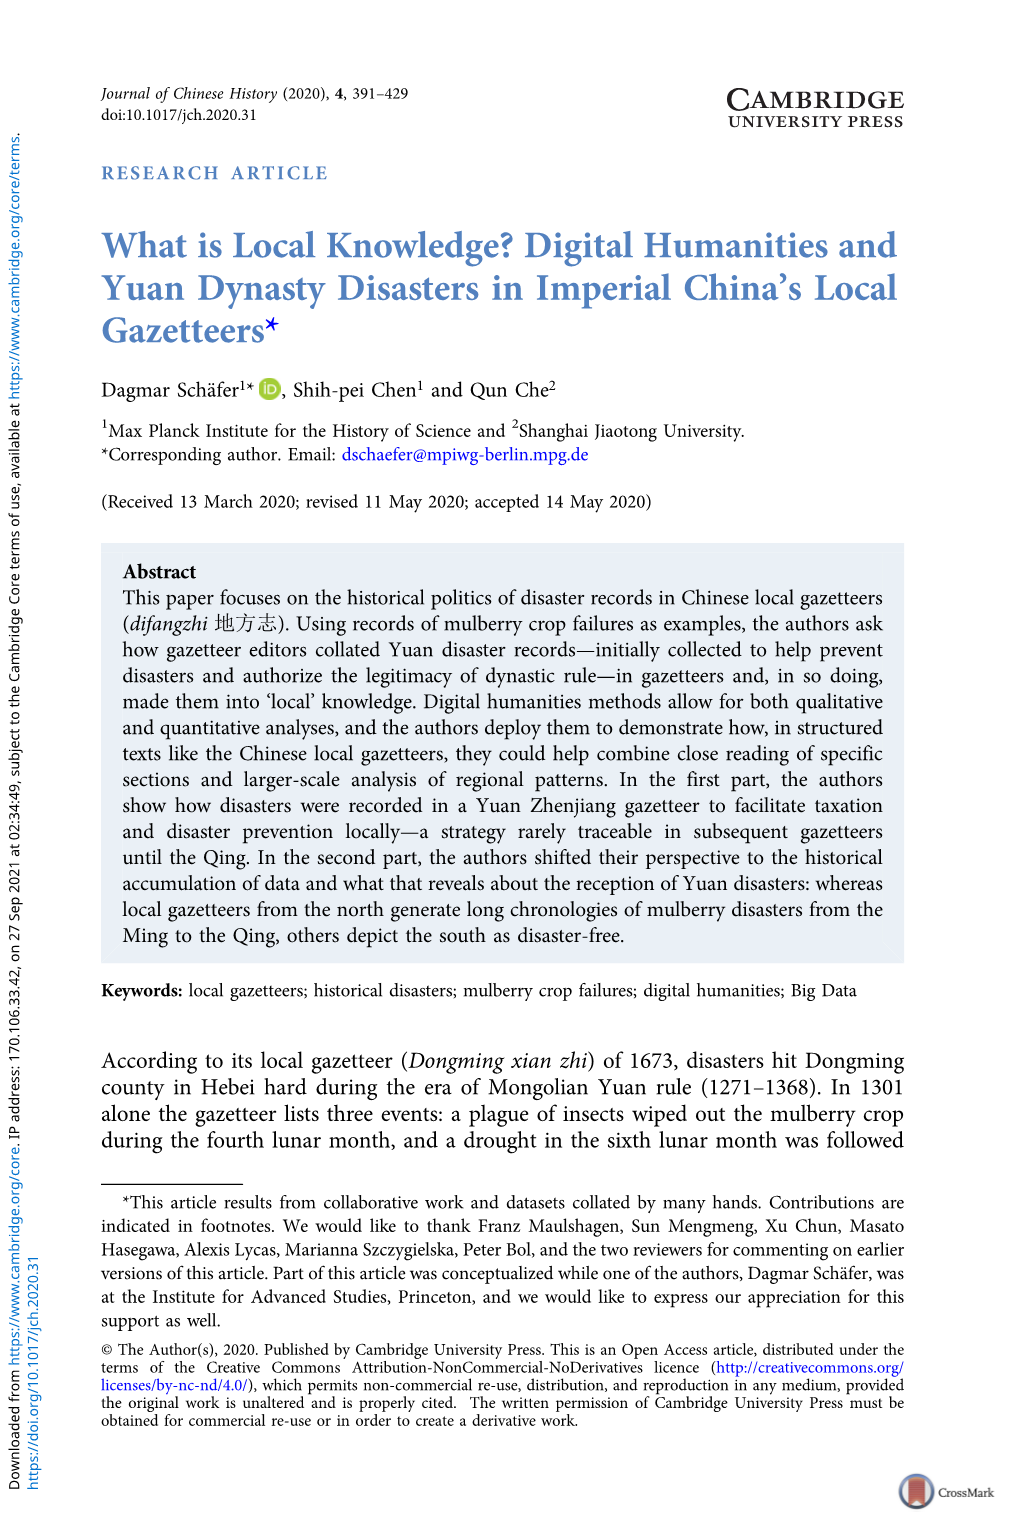 Digital Humanities and Yuan Dynasty Disasters in Imperial Chinars Local